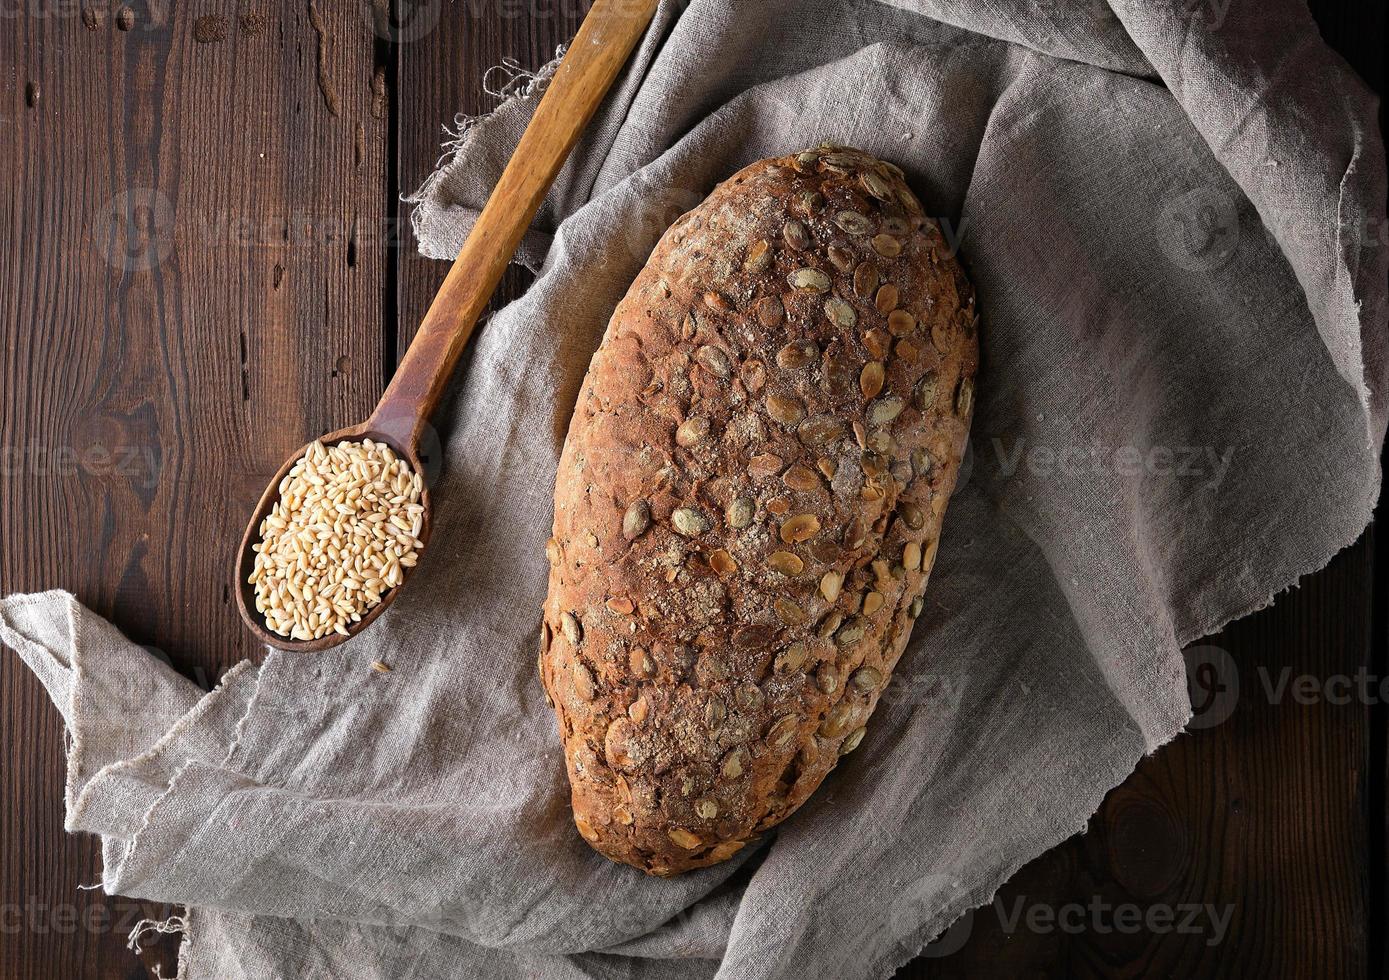 baked oval bread made from rye flour with pumpkin seeds on a gray linen napkin photo